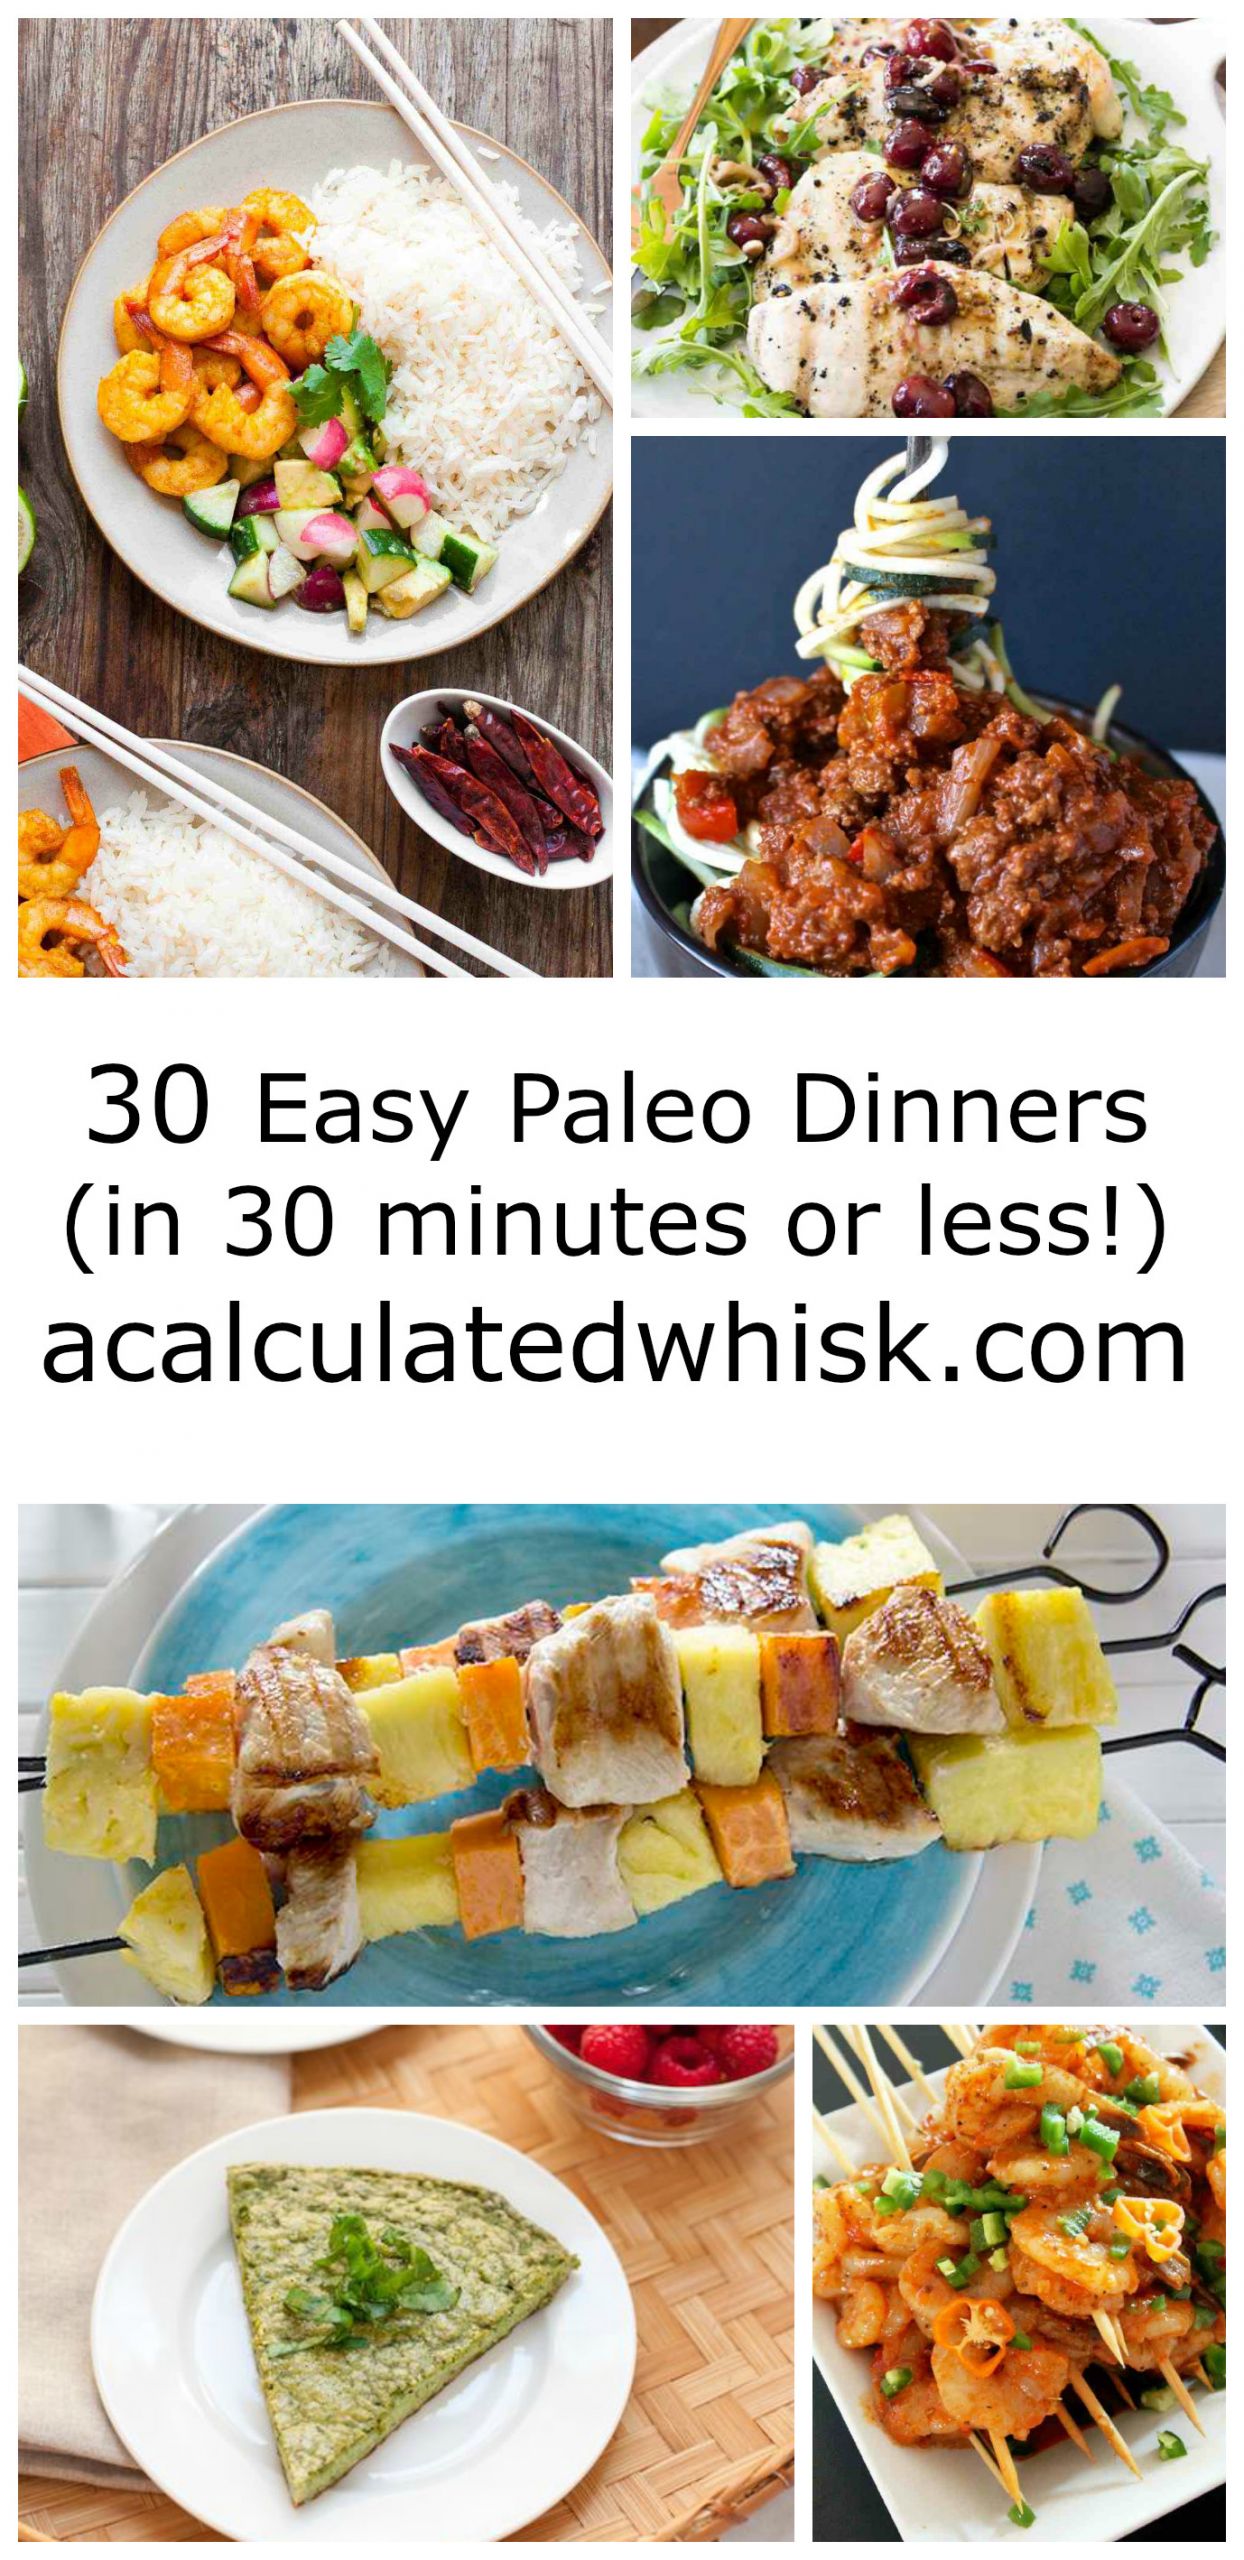 Simple Paleo Dinners
 30 Easy Paleo Dinners in 30 minutes or less A